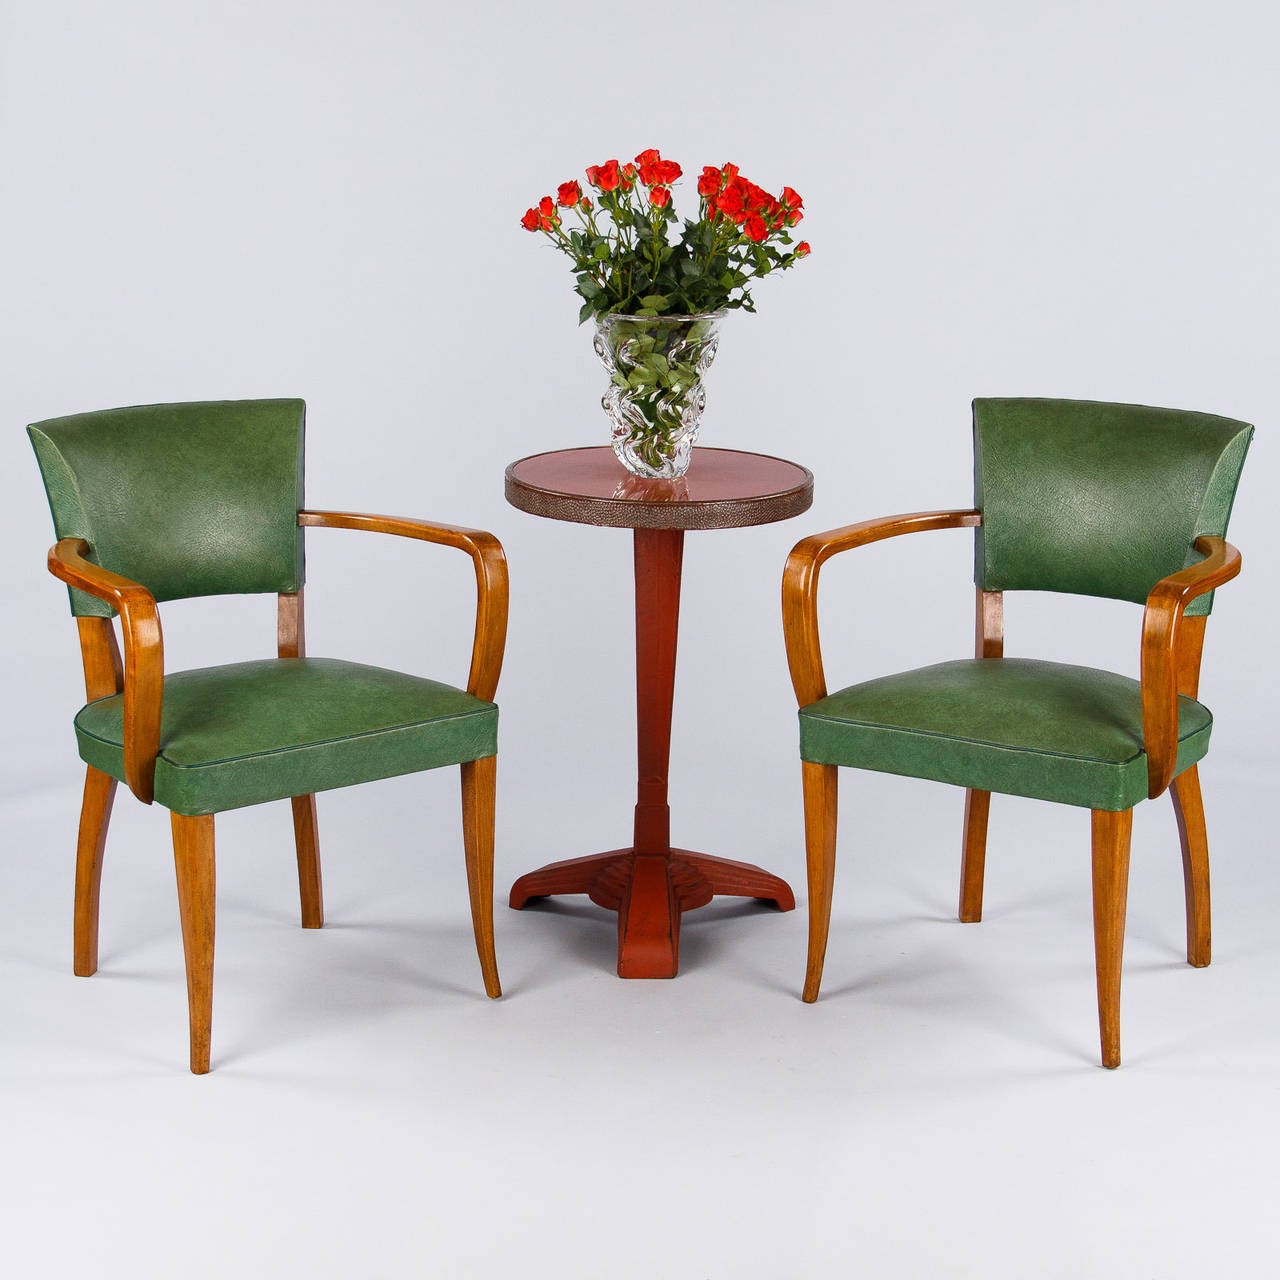 From Lyon, France, this set of four bridge armchairs date to the 1940s. Made of beech wood with curved armrests and legs, the seats and backs are light green vinyl with a darker green cording trim. Floor to seat: 17.50